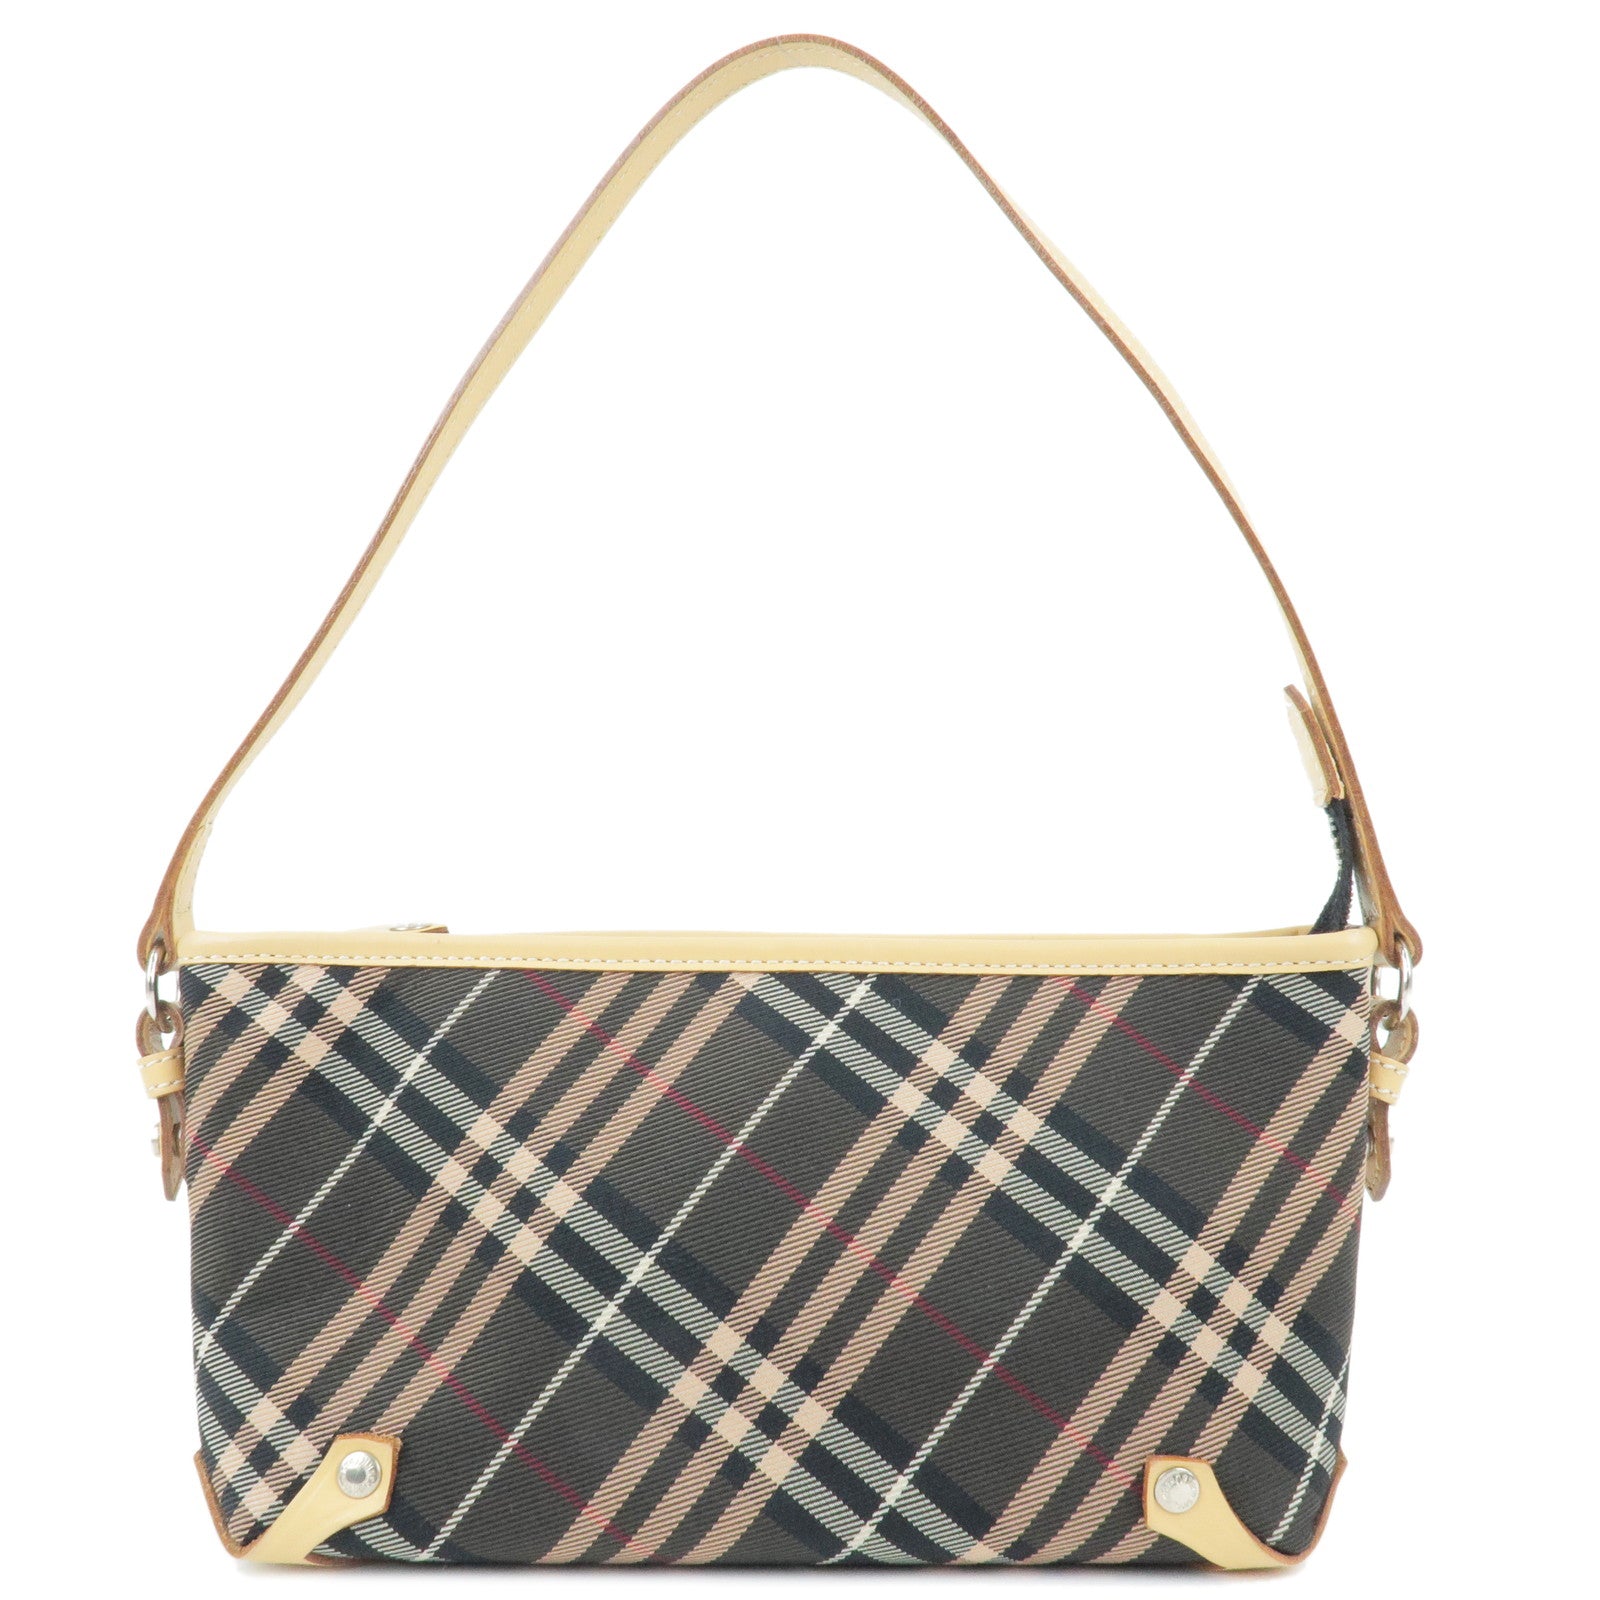 Burberry Vintage Check and Leather Crossbody bag#, Beige